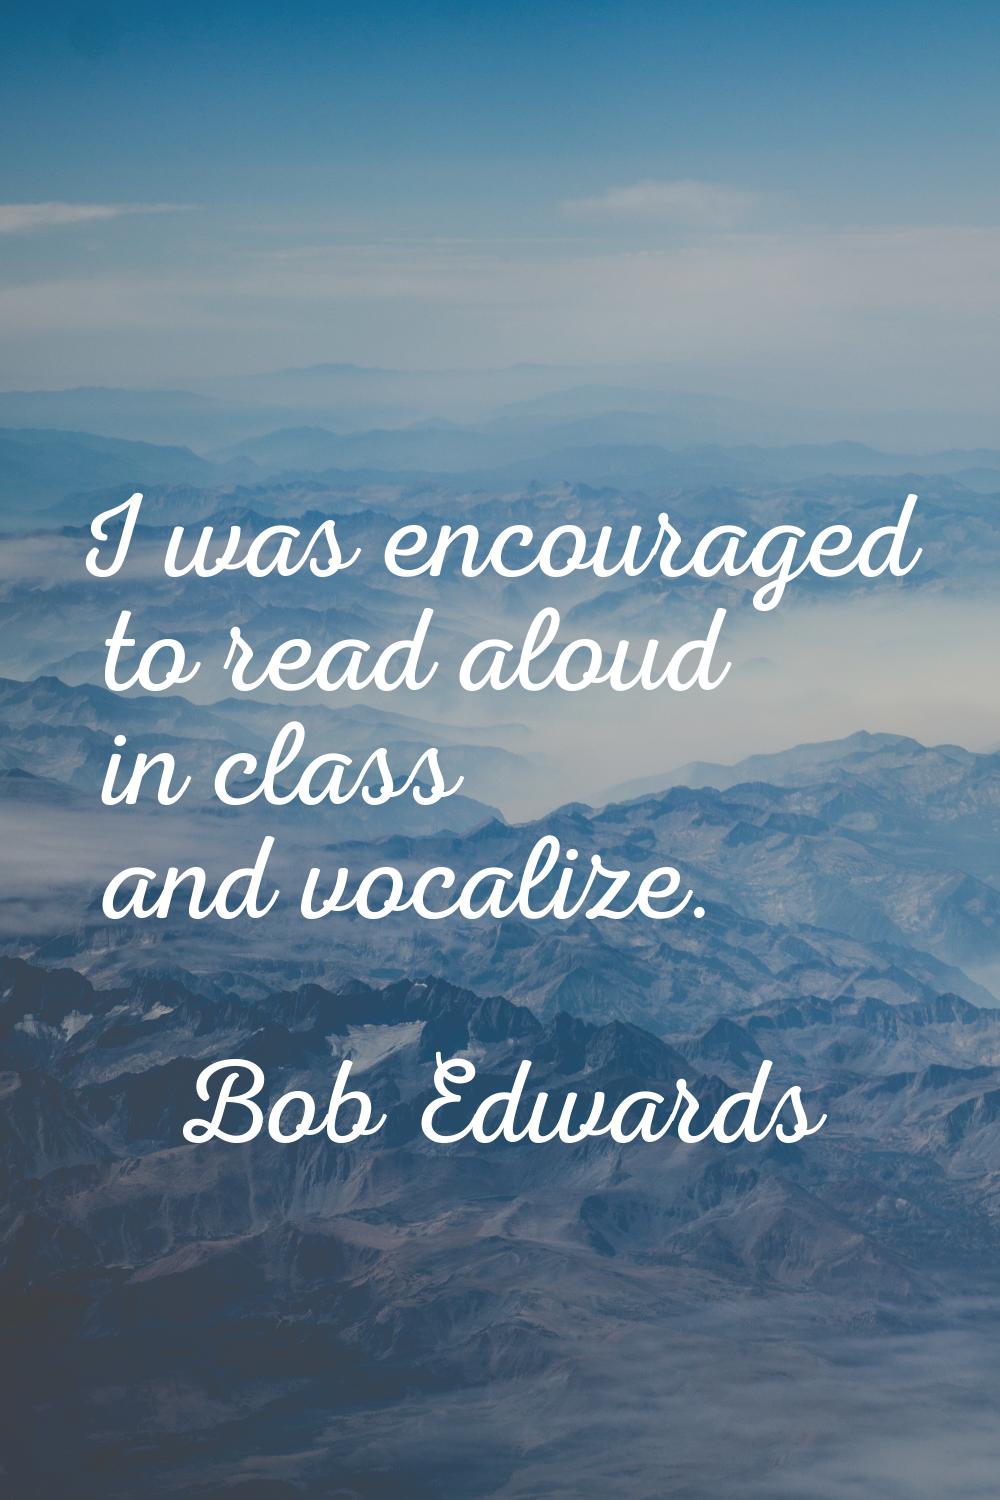 I was encouraged to read aloud in class and vocalize.